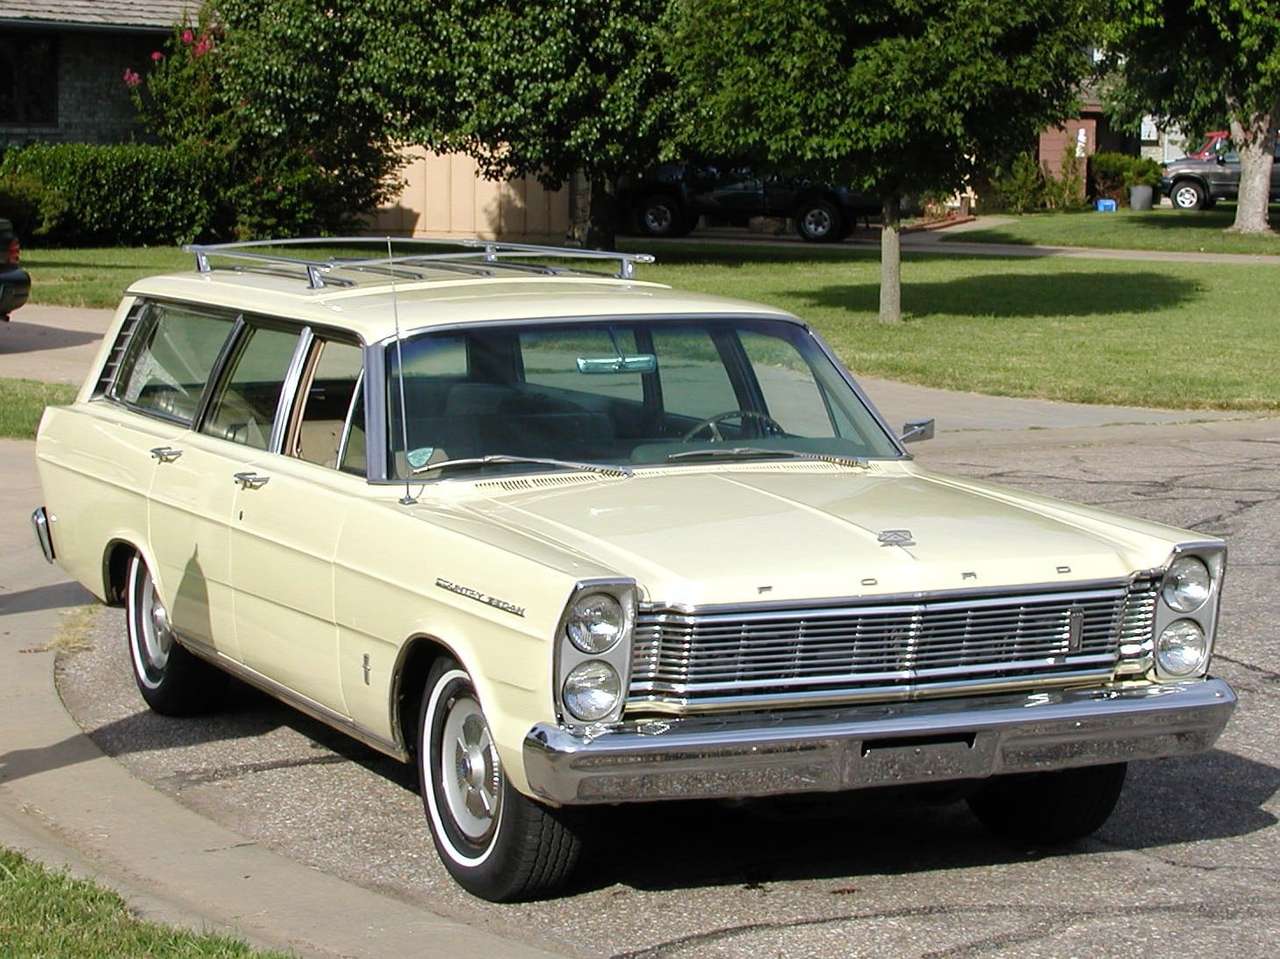 1965 Ford Country Wagon online puzzle